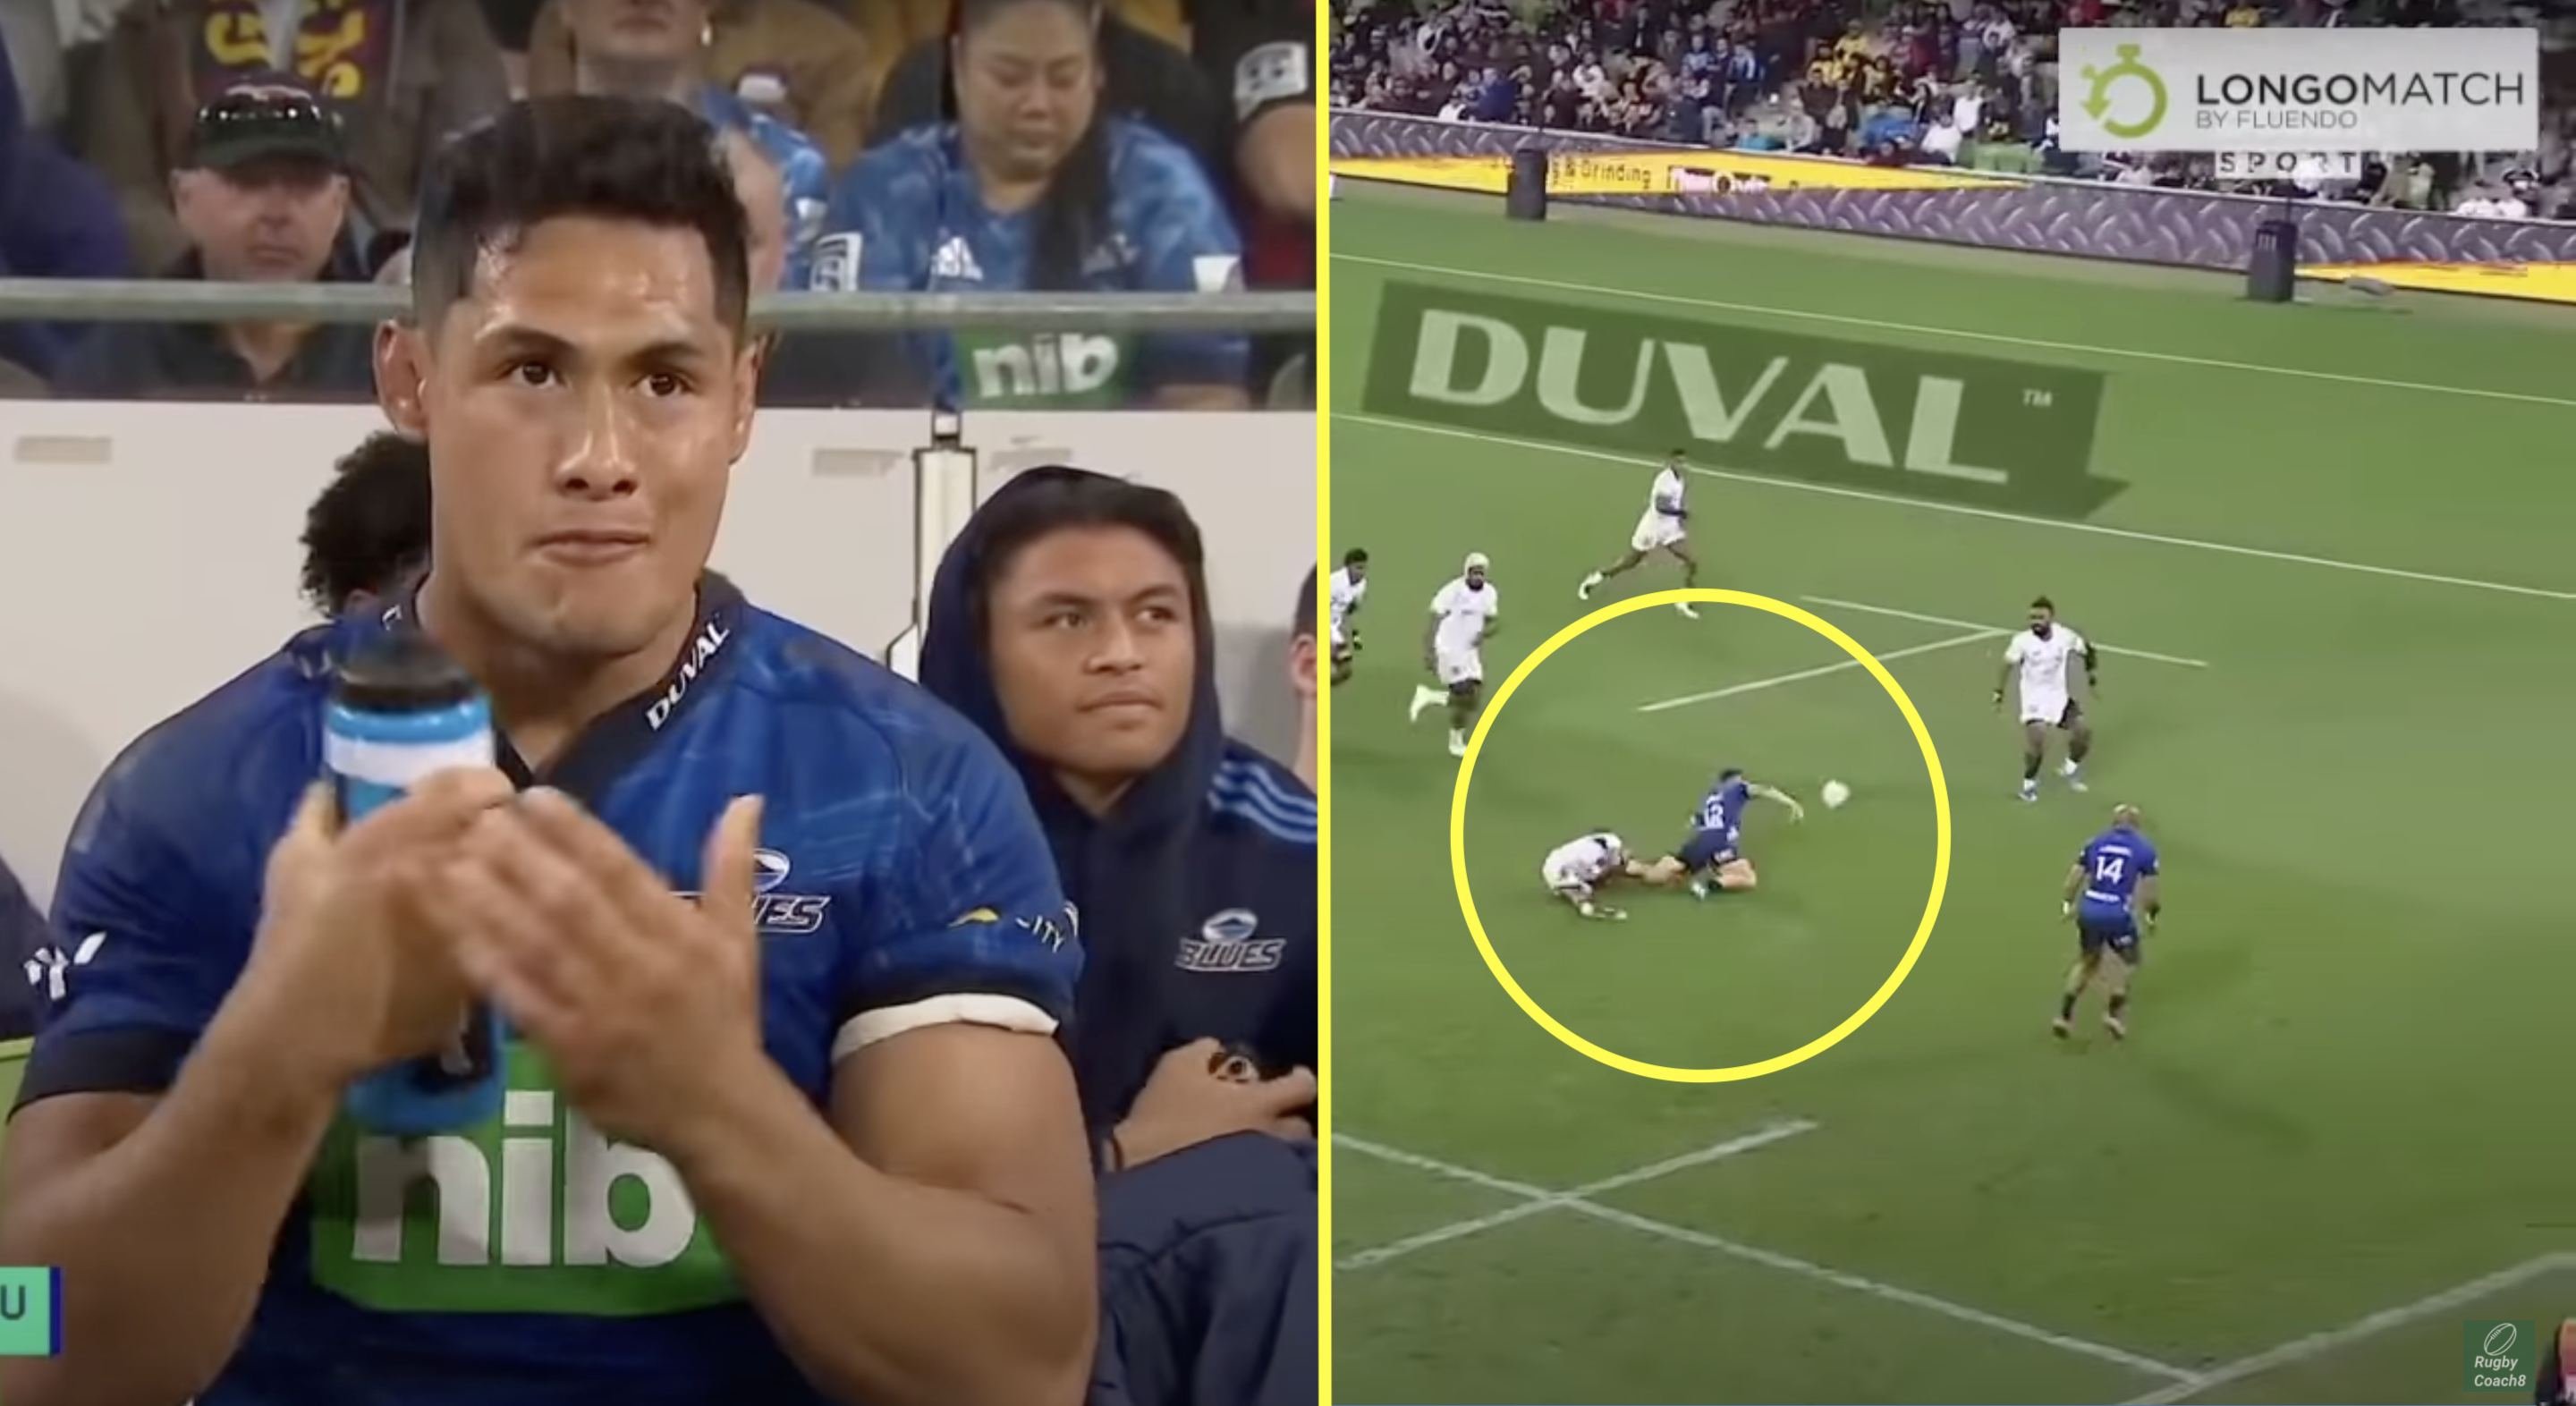 Barrett & Tuivasa-Sheck shaping up to be most lethal 10-12 combo in world rugby